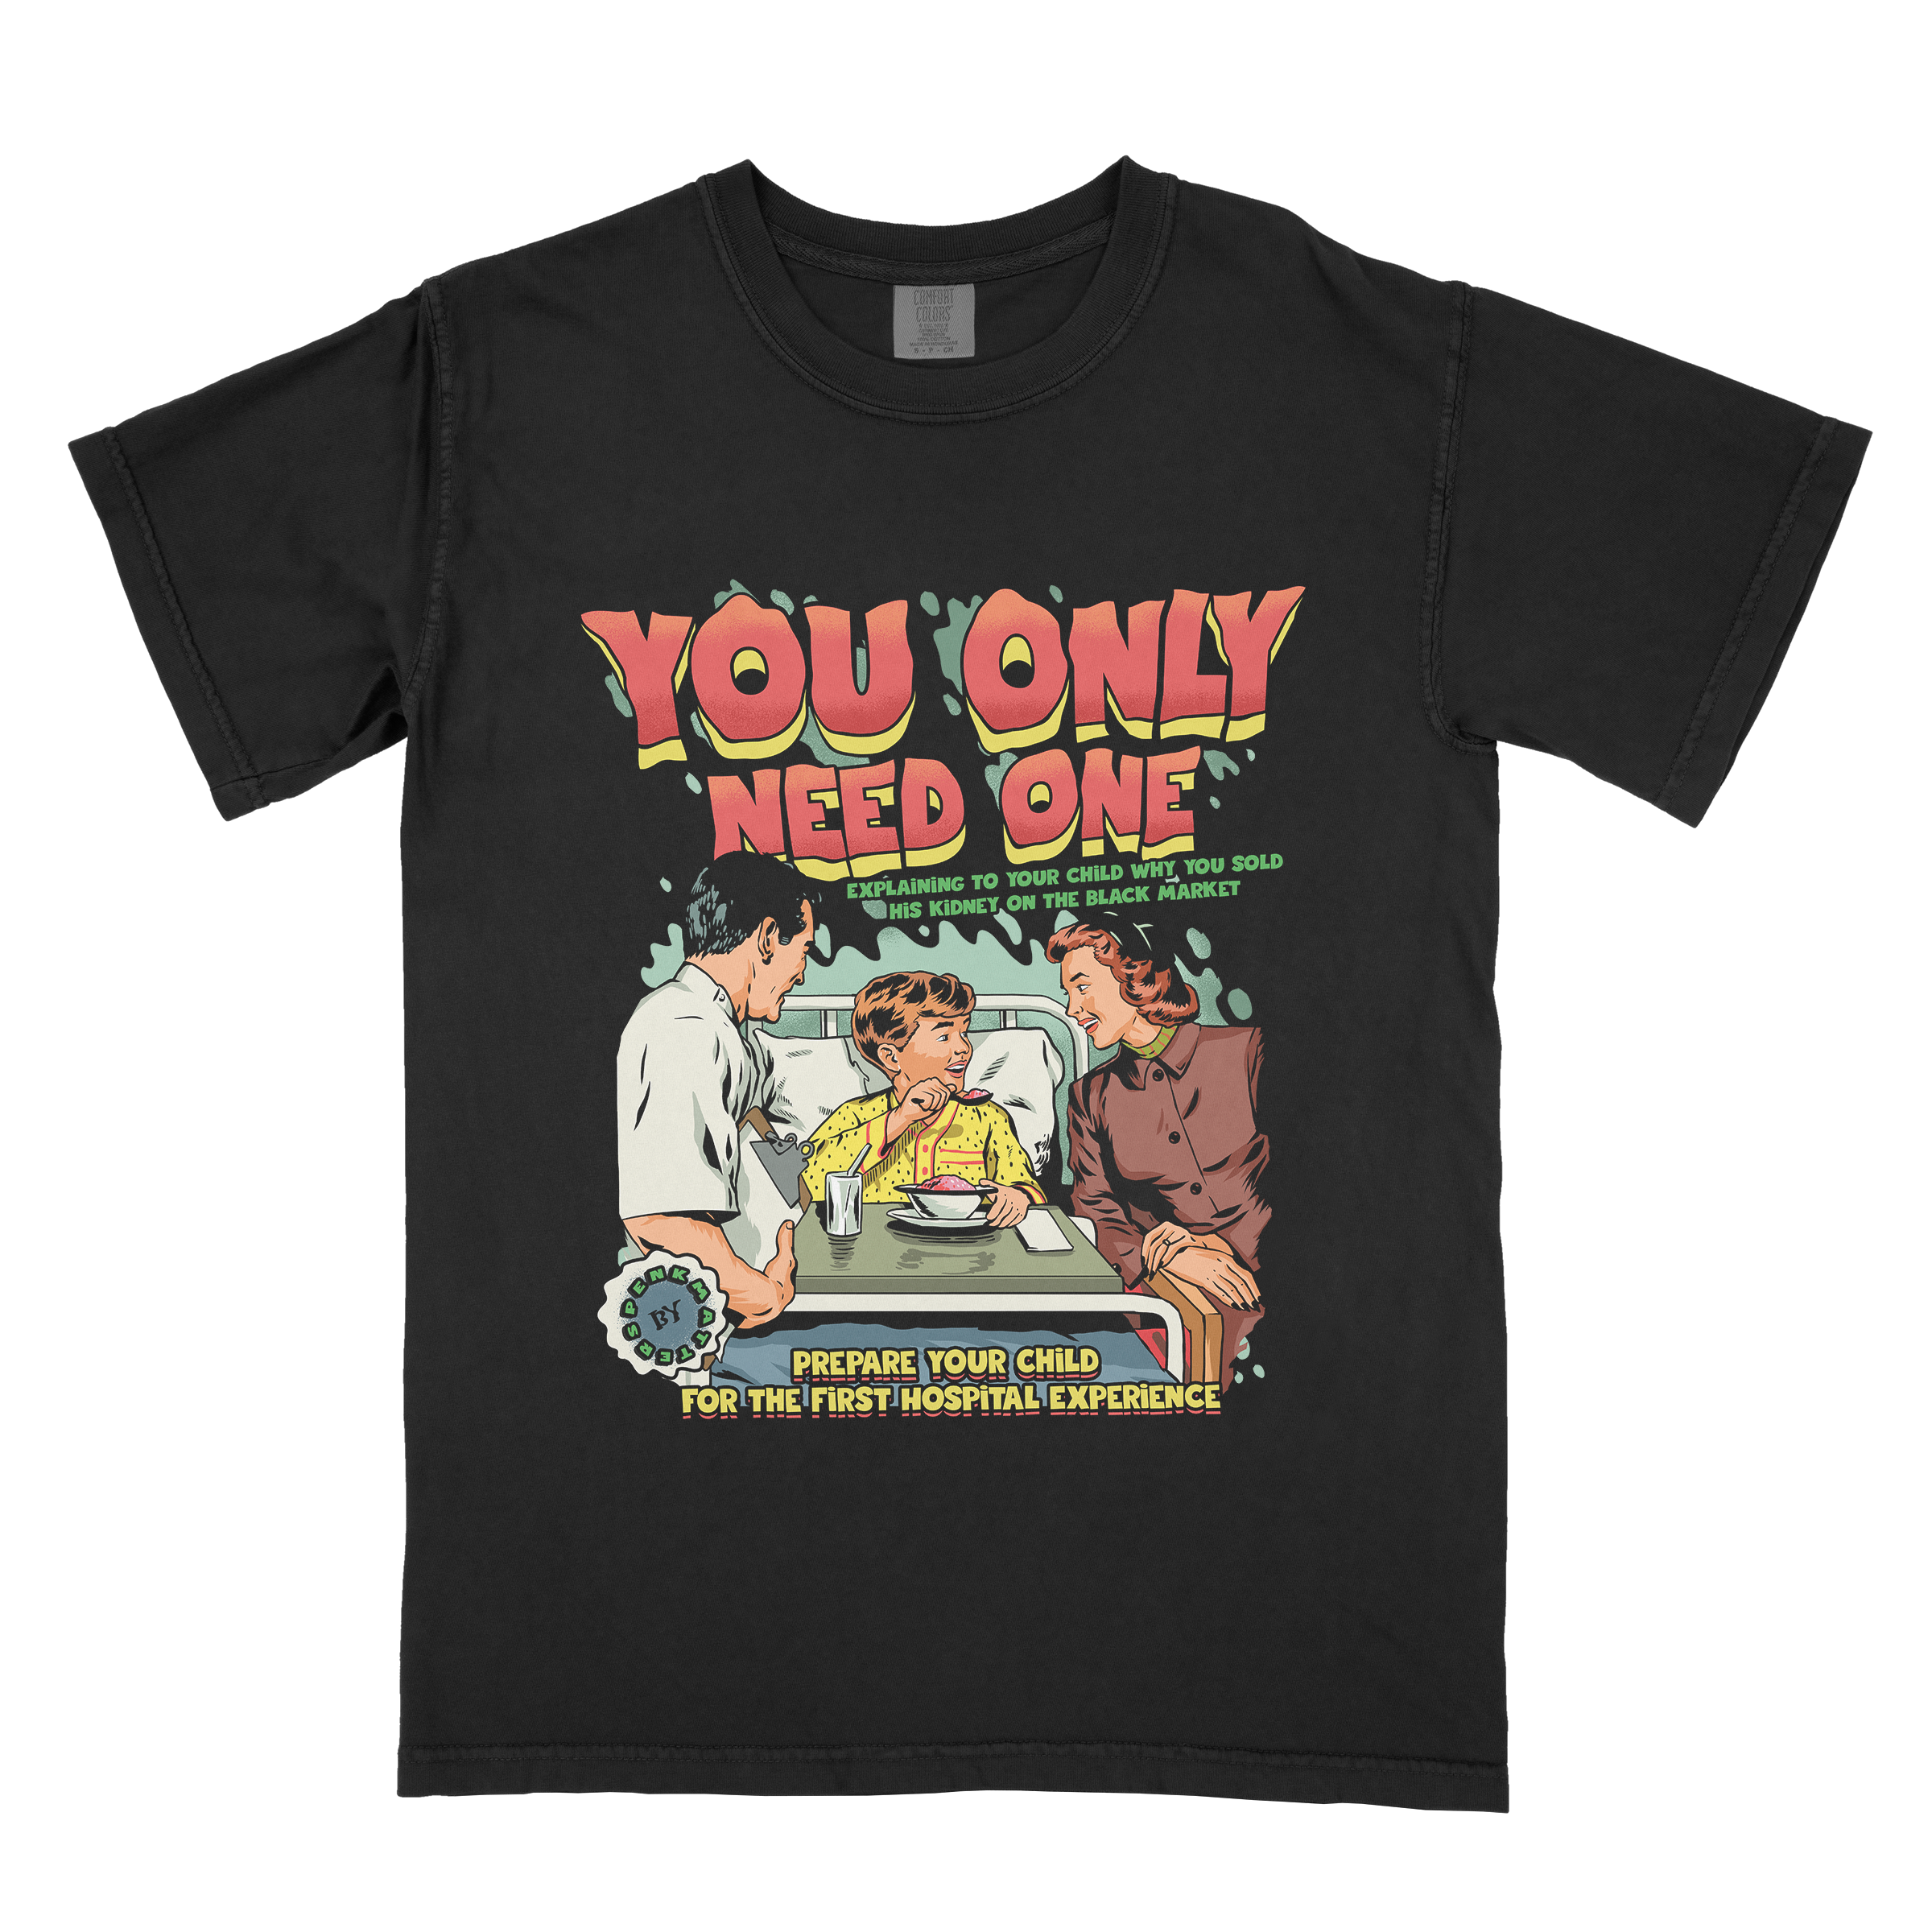 "You Only Need One" T-Shirt